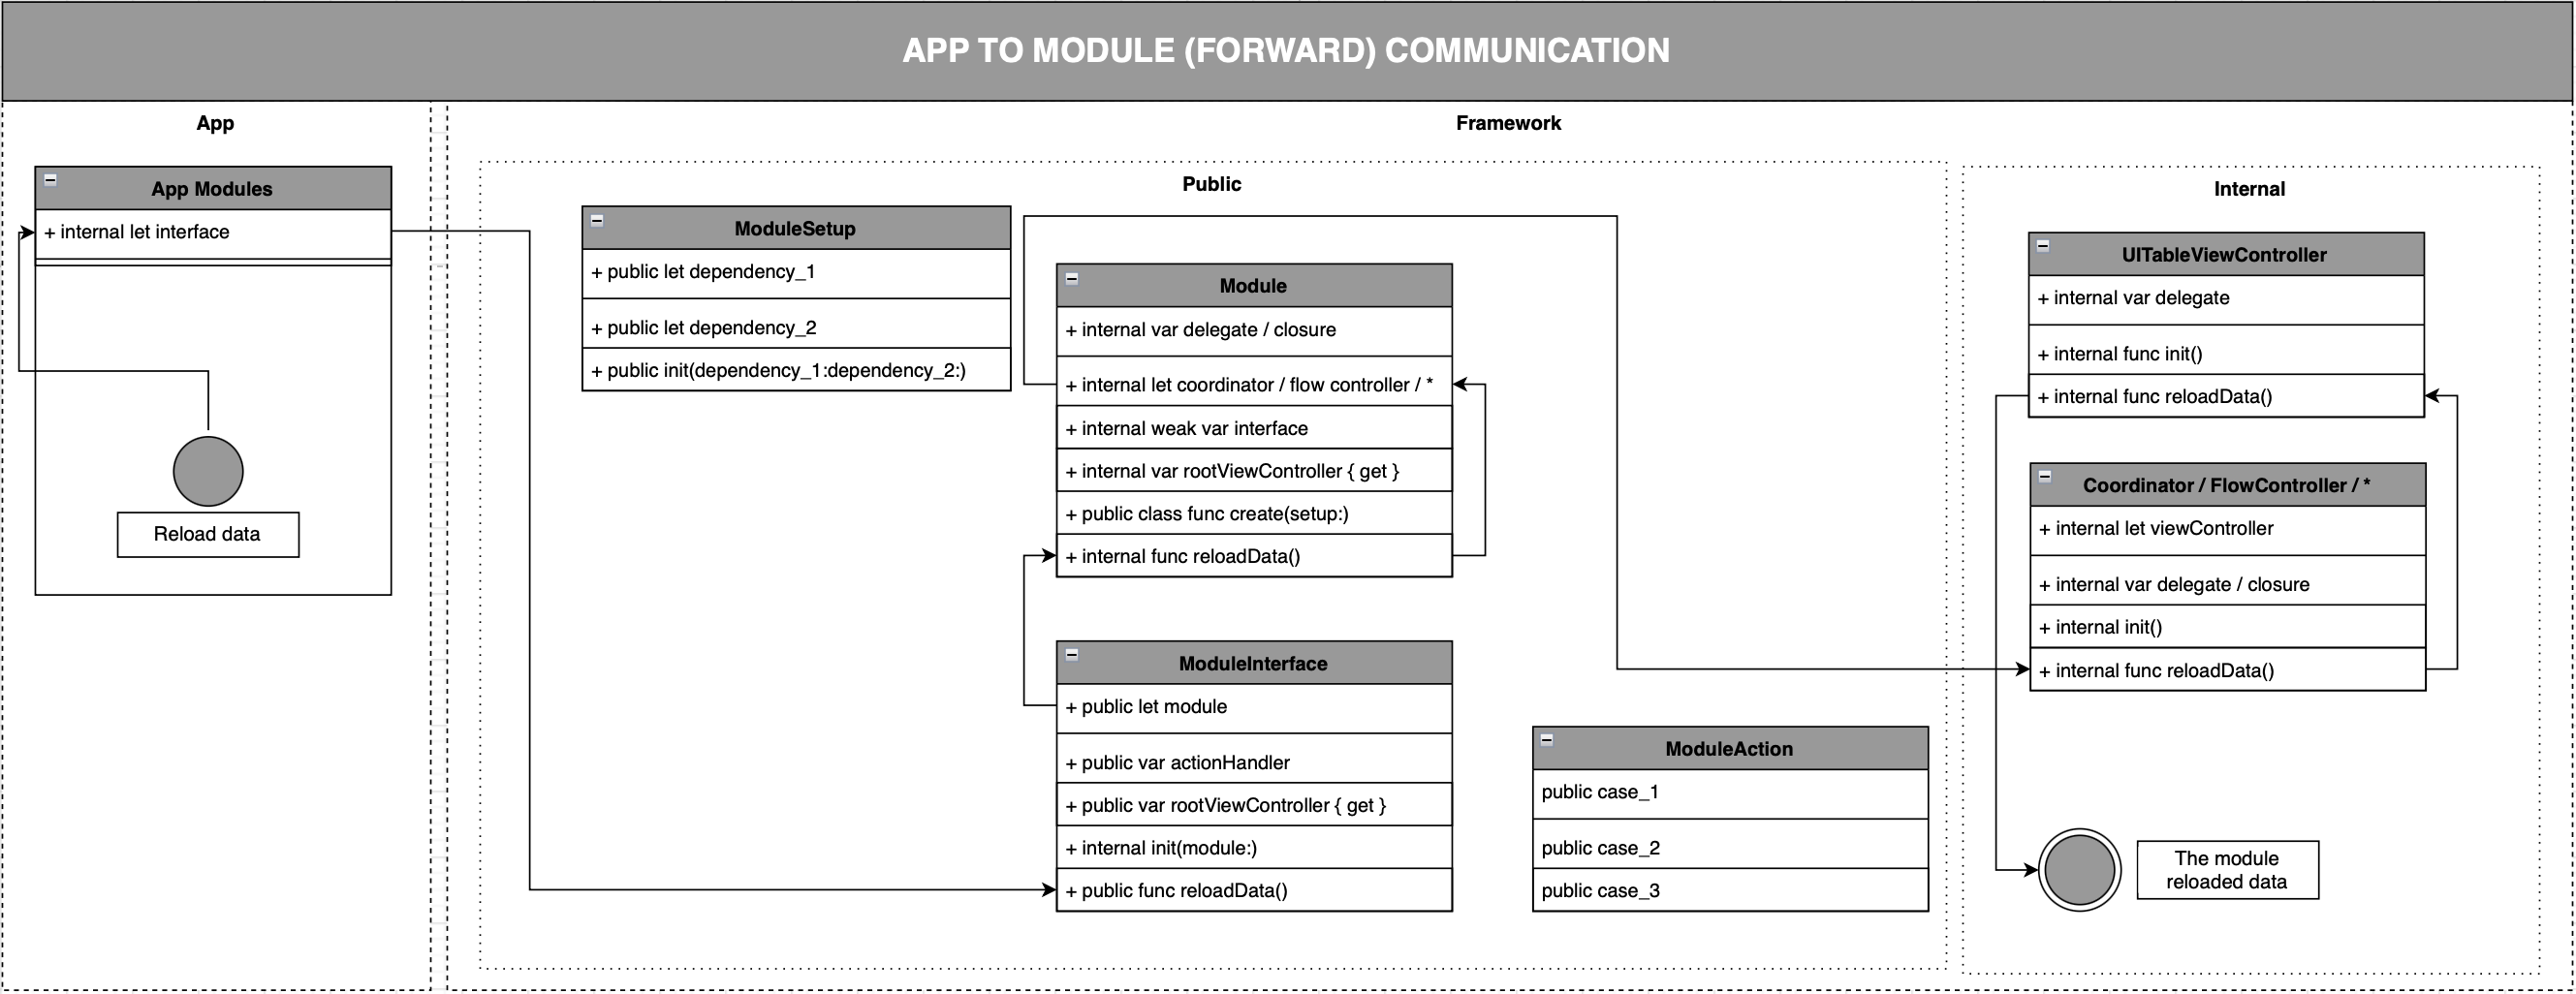 From App To Module Communication